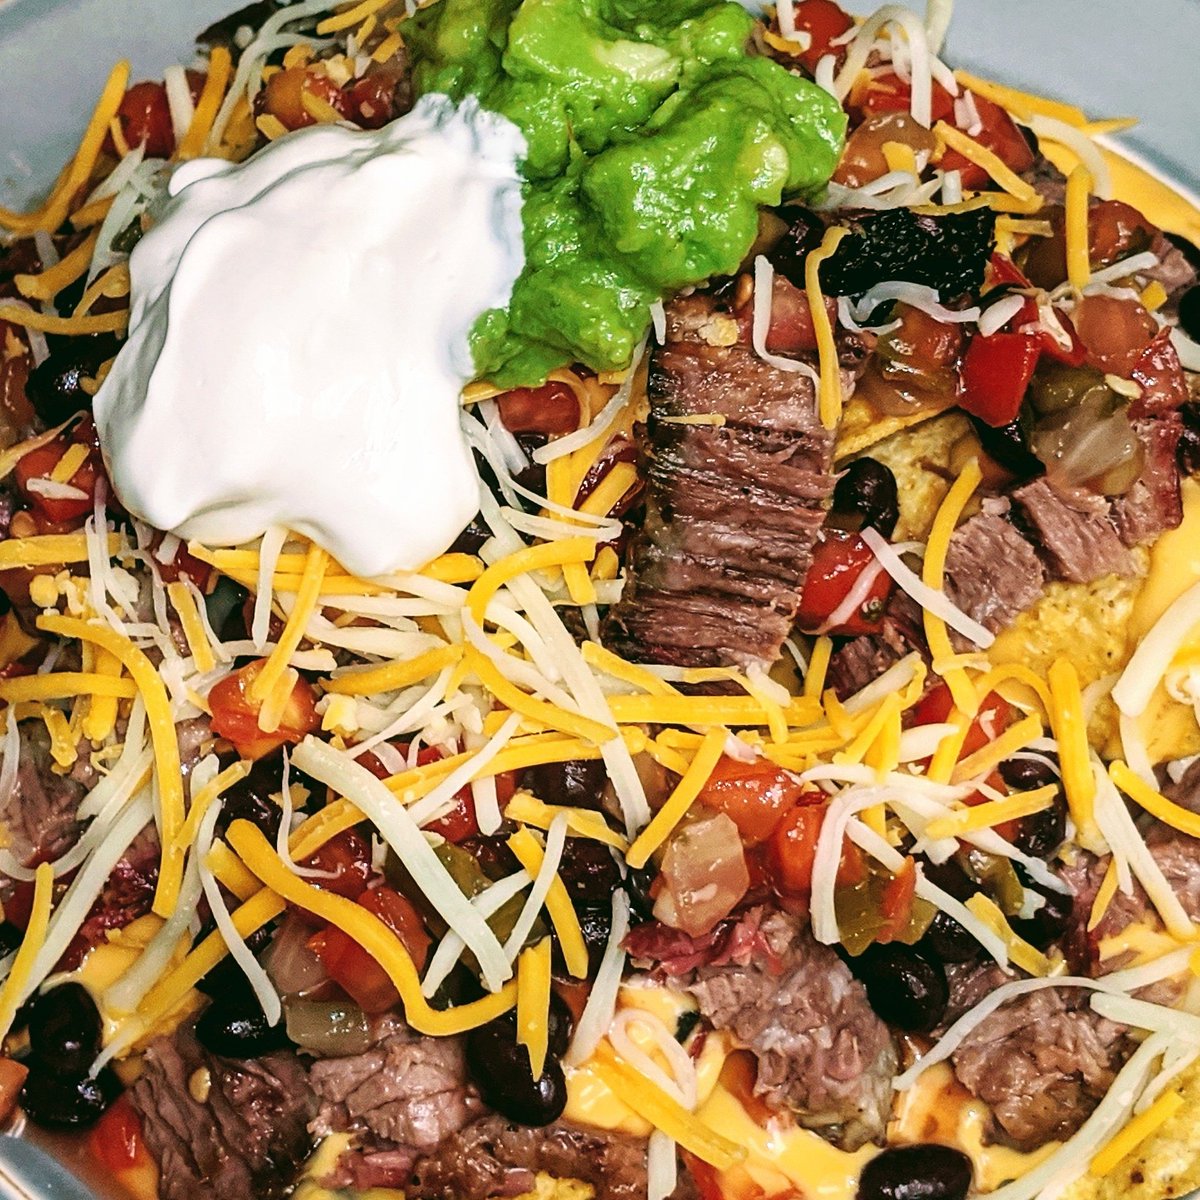 Rancho Nachos

Smoked Brisket
Fresh Cut Tomatoes, Cilantro, Onions and Peppers
Homemade Guacamole
Sour Cream
BBQ Baked Beans
Homemade Creamy Cheese Sauce
Grated Cheese
ASH BBQ Spices

#ASHBBQ
#AndersonSmokeHouseBBQ
#AndersonEntertainment
#DjDennisAnderson